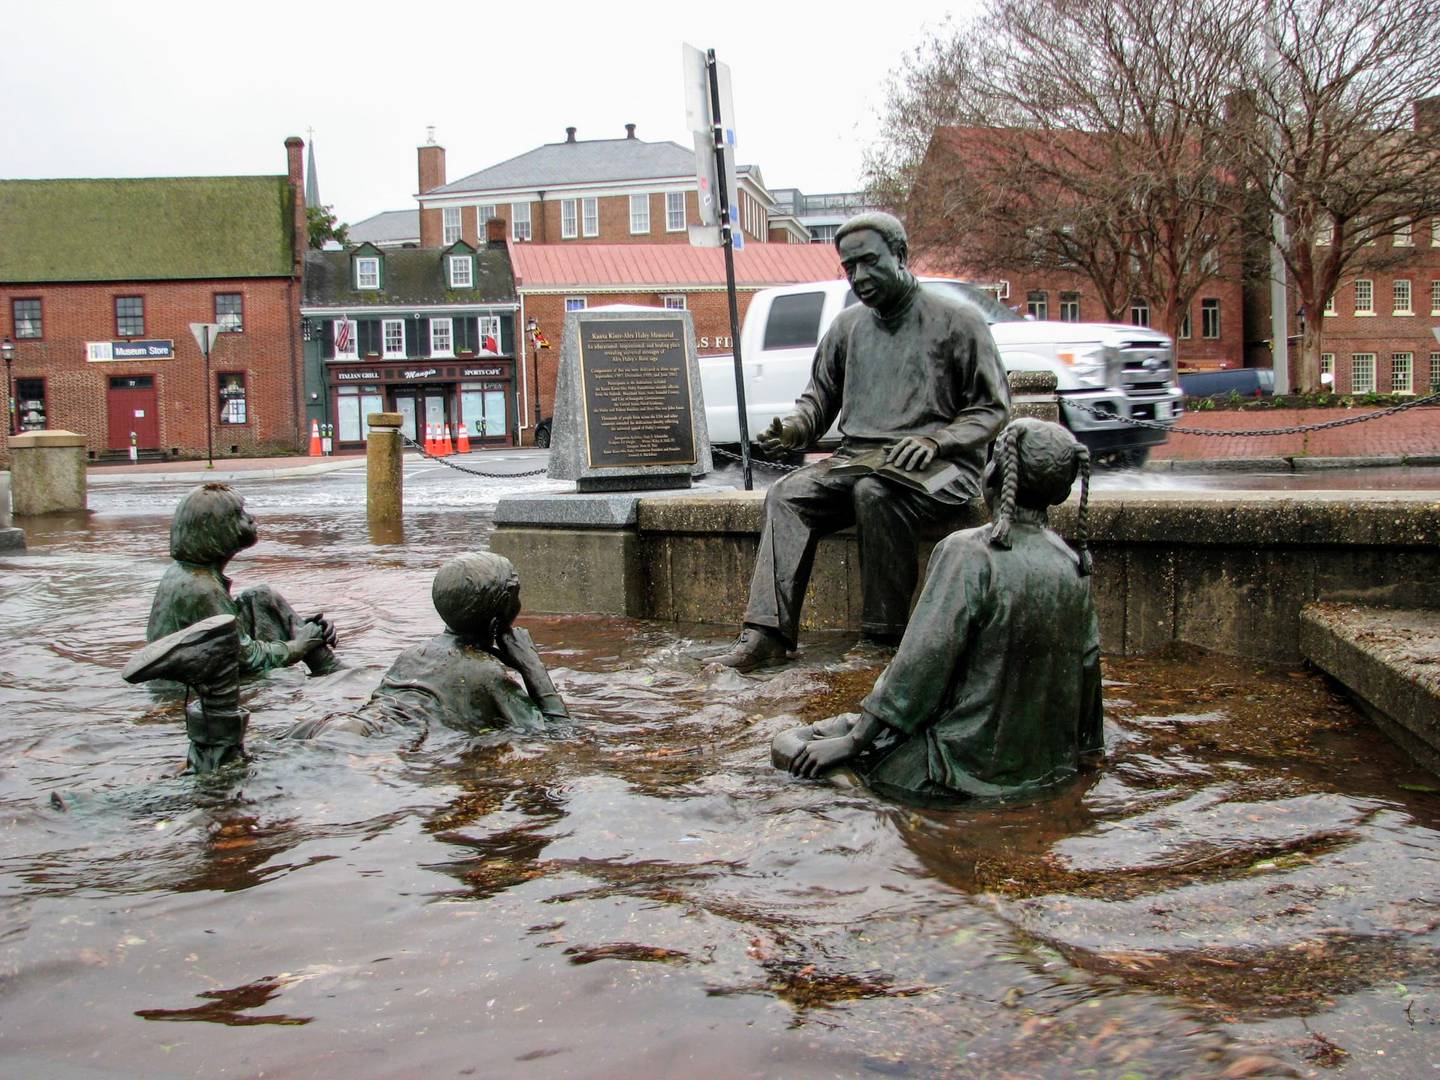 The water keeps rising at City Dock in Annapolis, often measured against the statue of author Alex Haley.